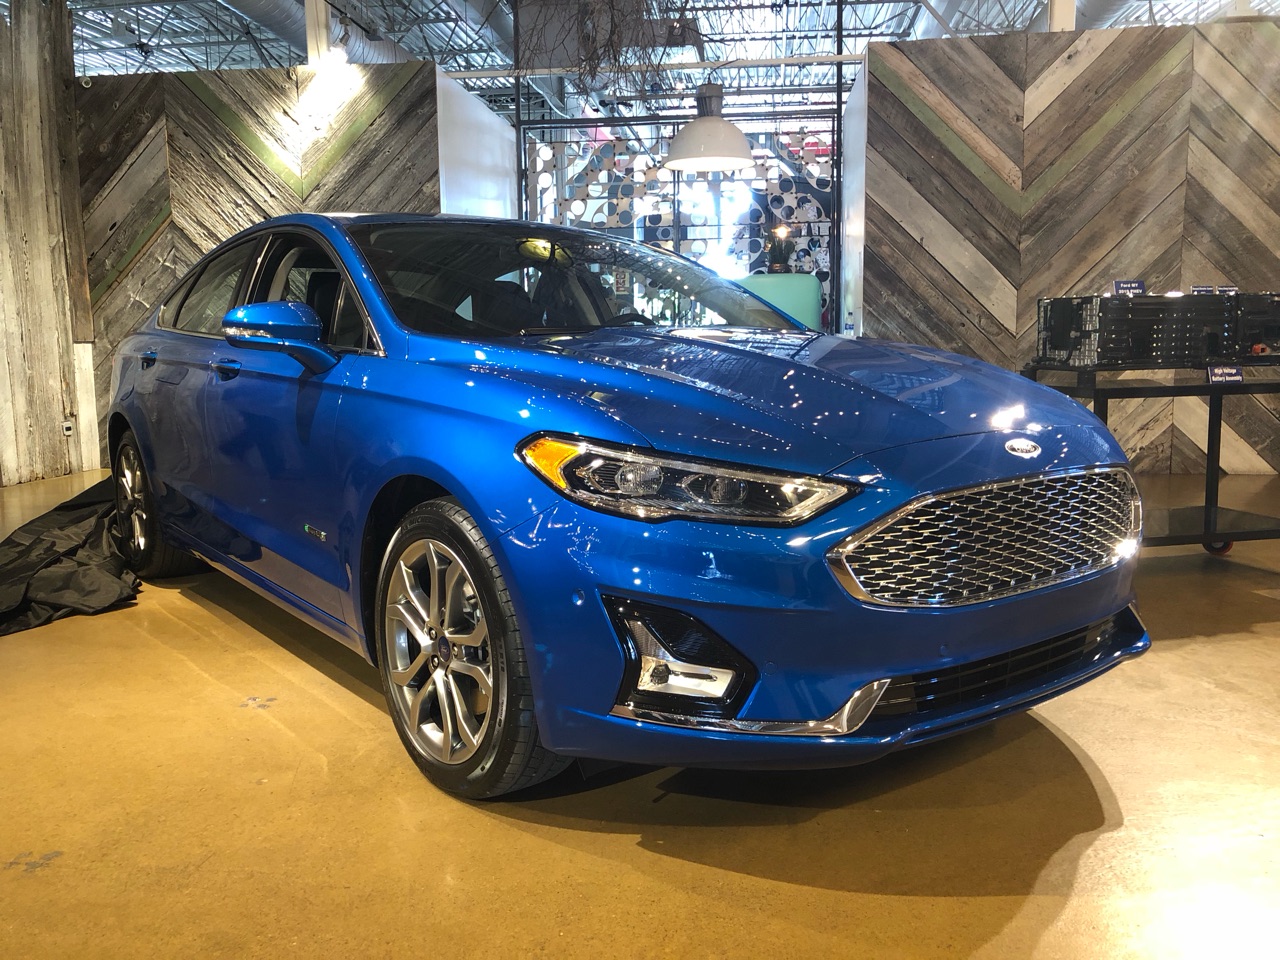 fluff buff and safety stuff 2019 ford fusion s new face and tail co pilot360 and longer range